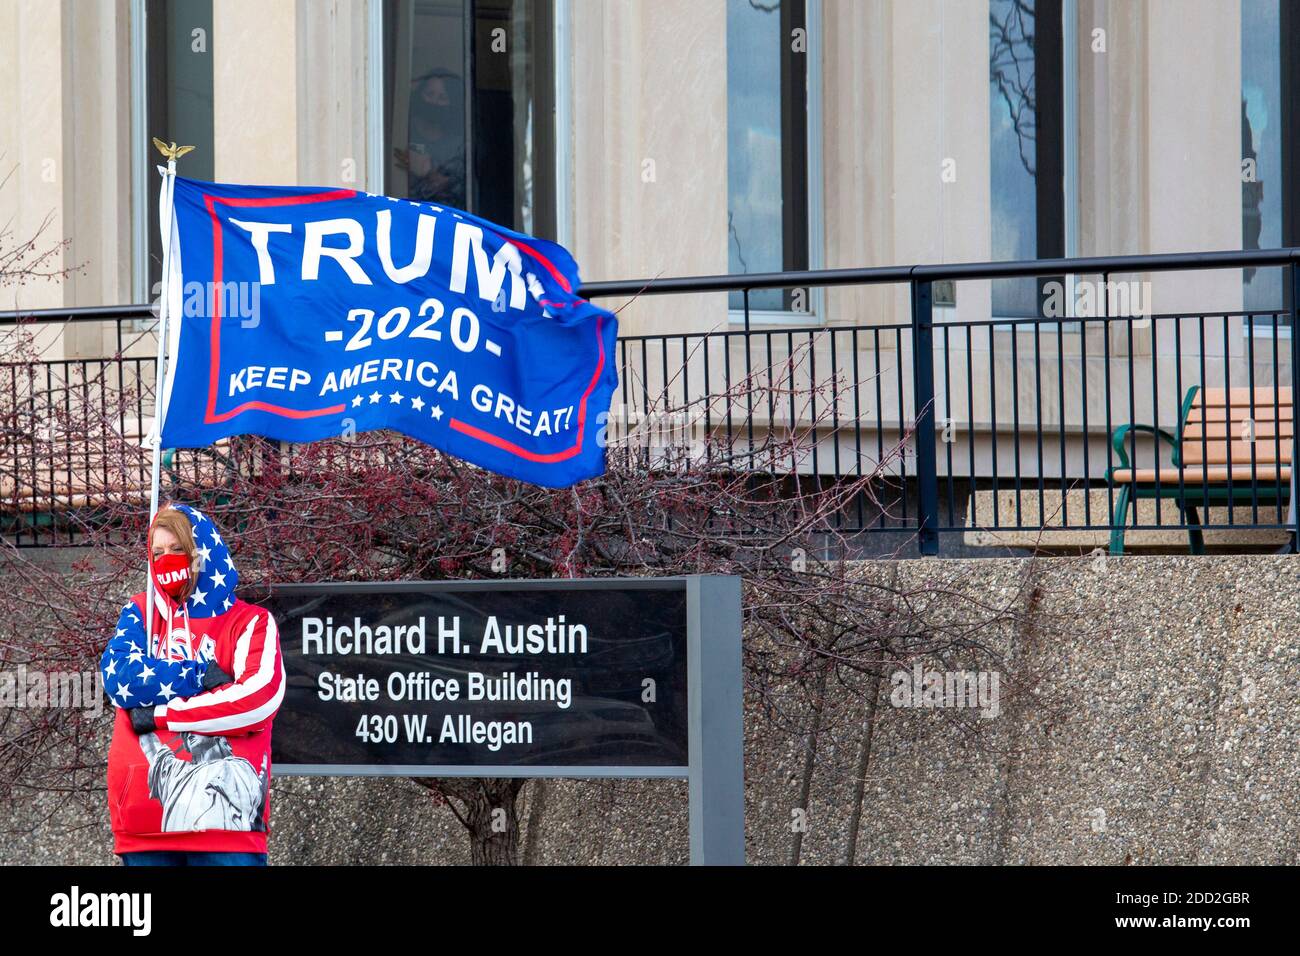 Lansing, Michigan, USA. 23rd Nov, 2020. A supporter of President Trump waves a flag outside the Michigan Secretary of State office as the Michigan Board of State Canvassers meets to decide whether to certify the results of the 2020 presidential election. The board subsequently certified the results, which showed Joe Biden ahead of President Trump by about 150,000 votes. Credit: Jim West/Alamy Live News Stock Photo